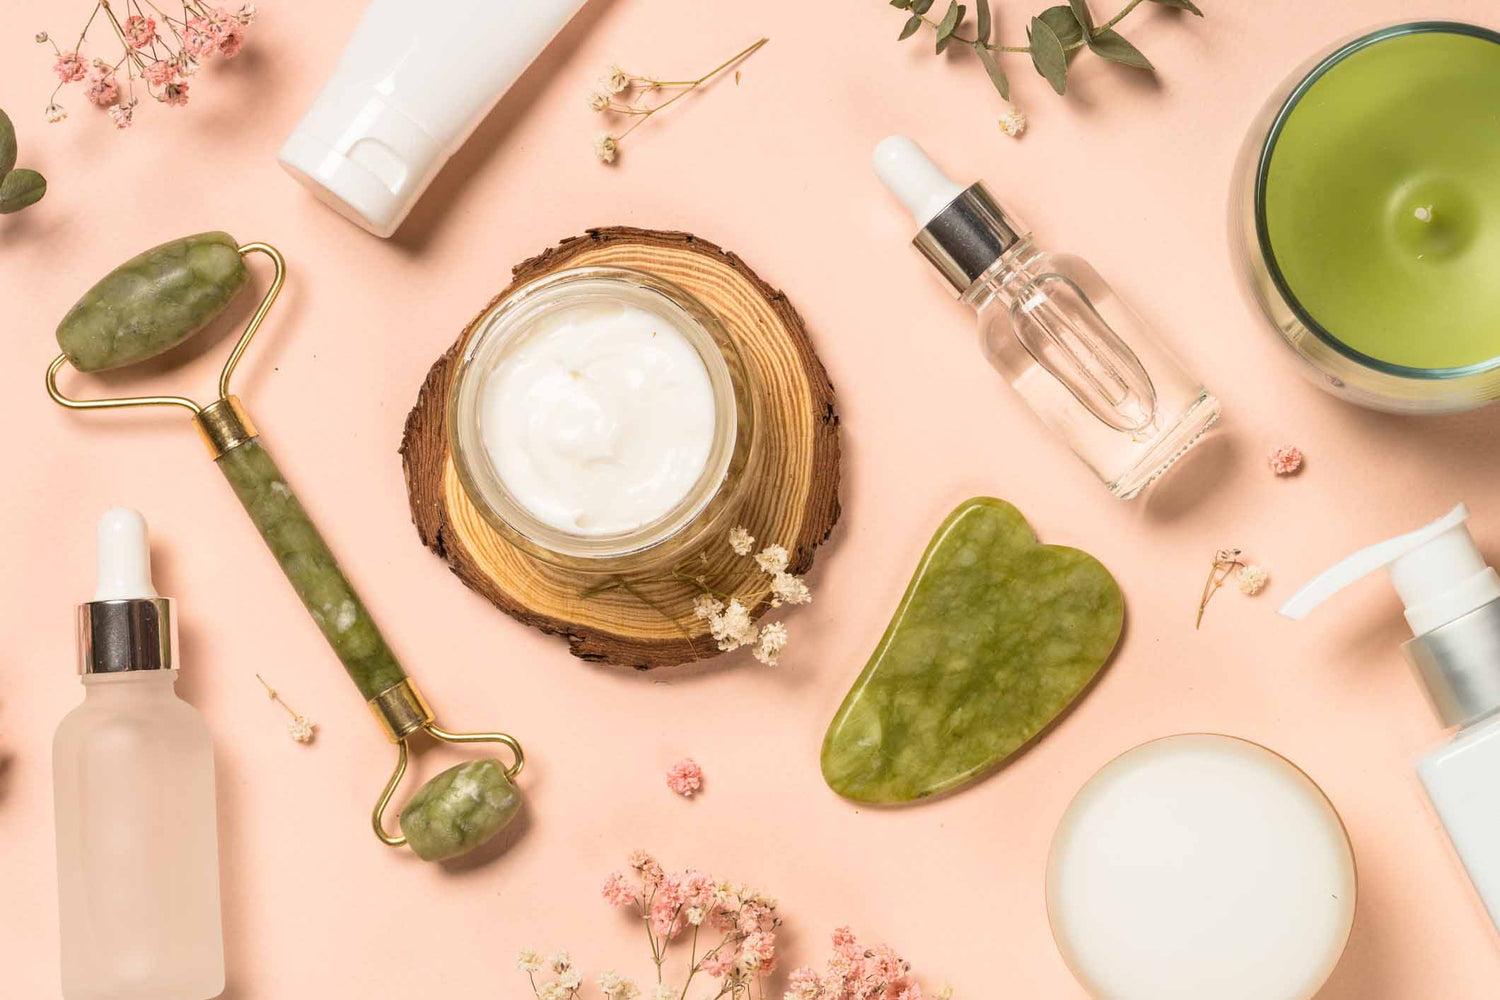 Learn about the 7 steps of an at home skincare routine for vibrant skin